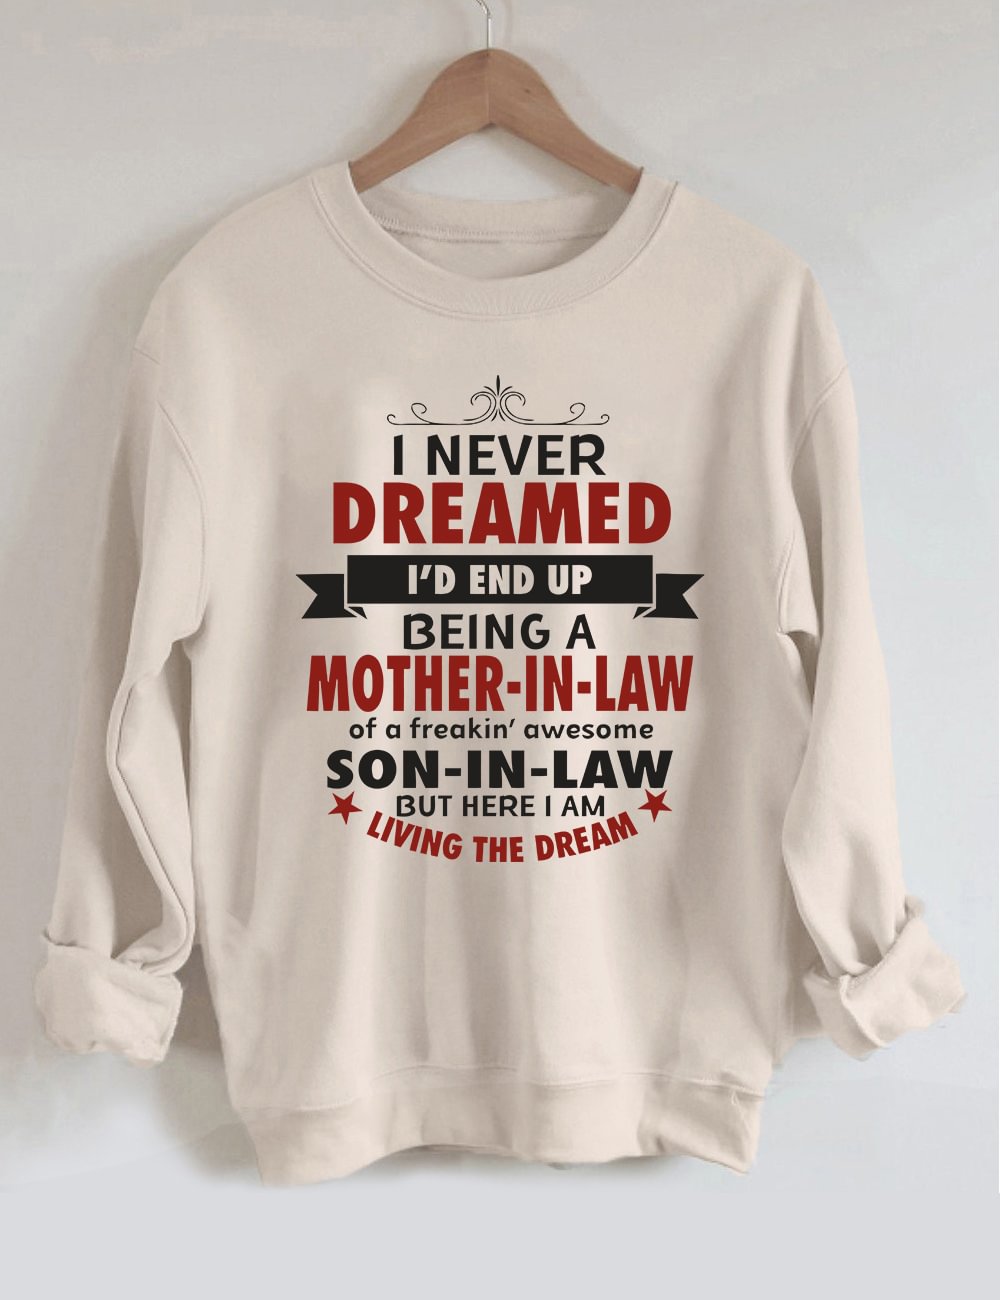 I'd End Up Being A Mother In Law Sweatshirt